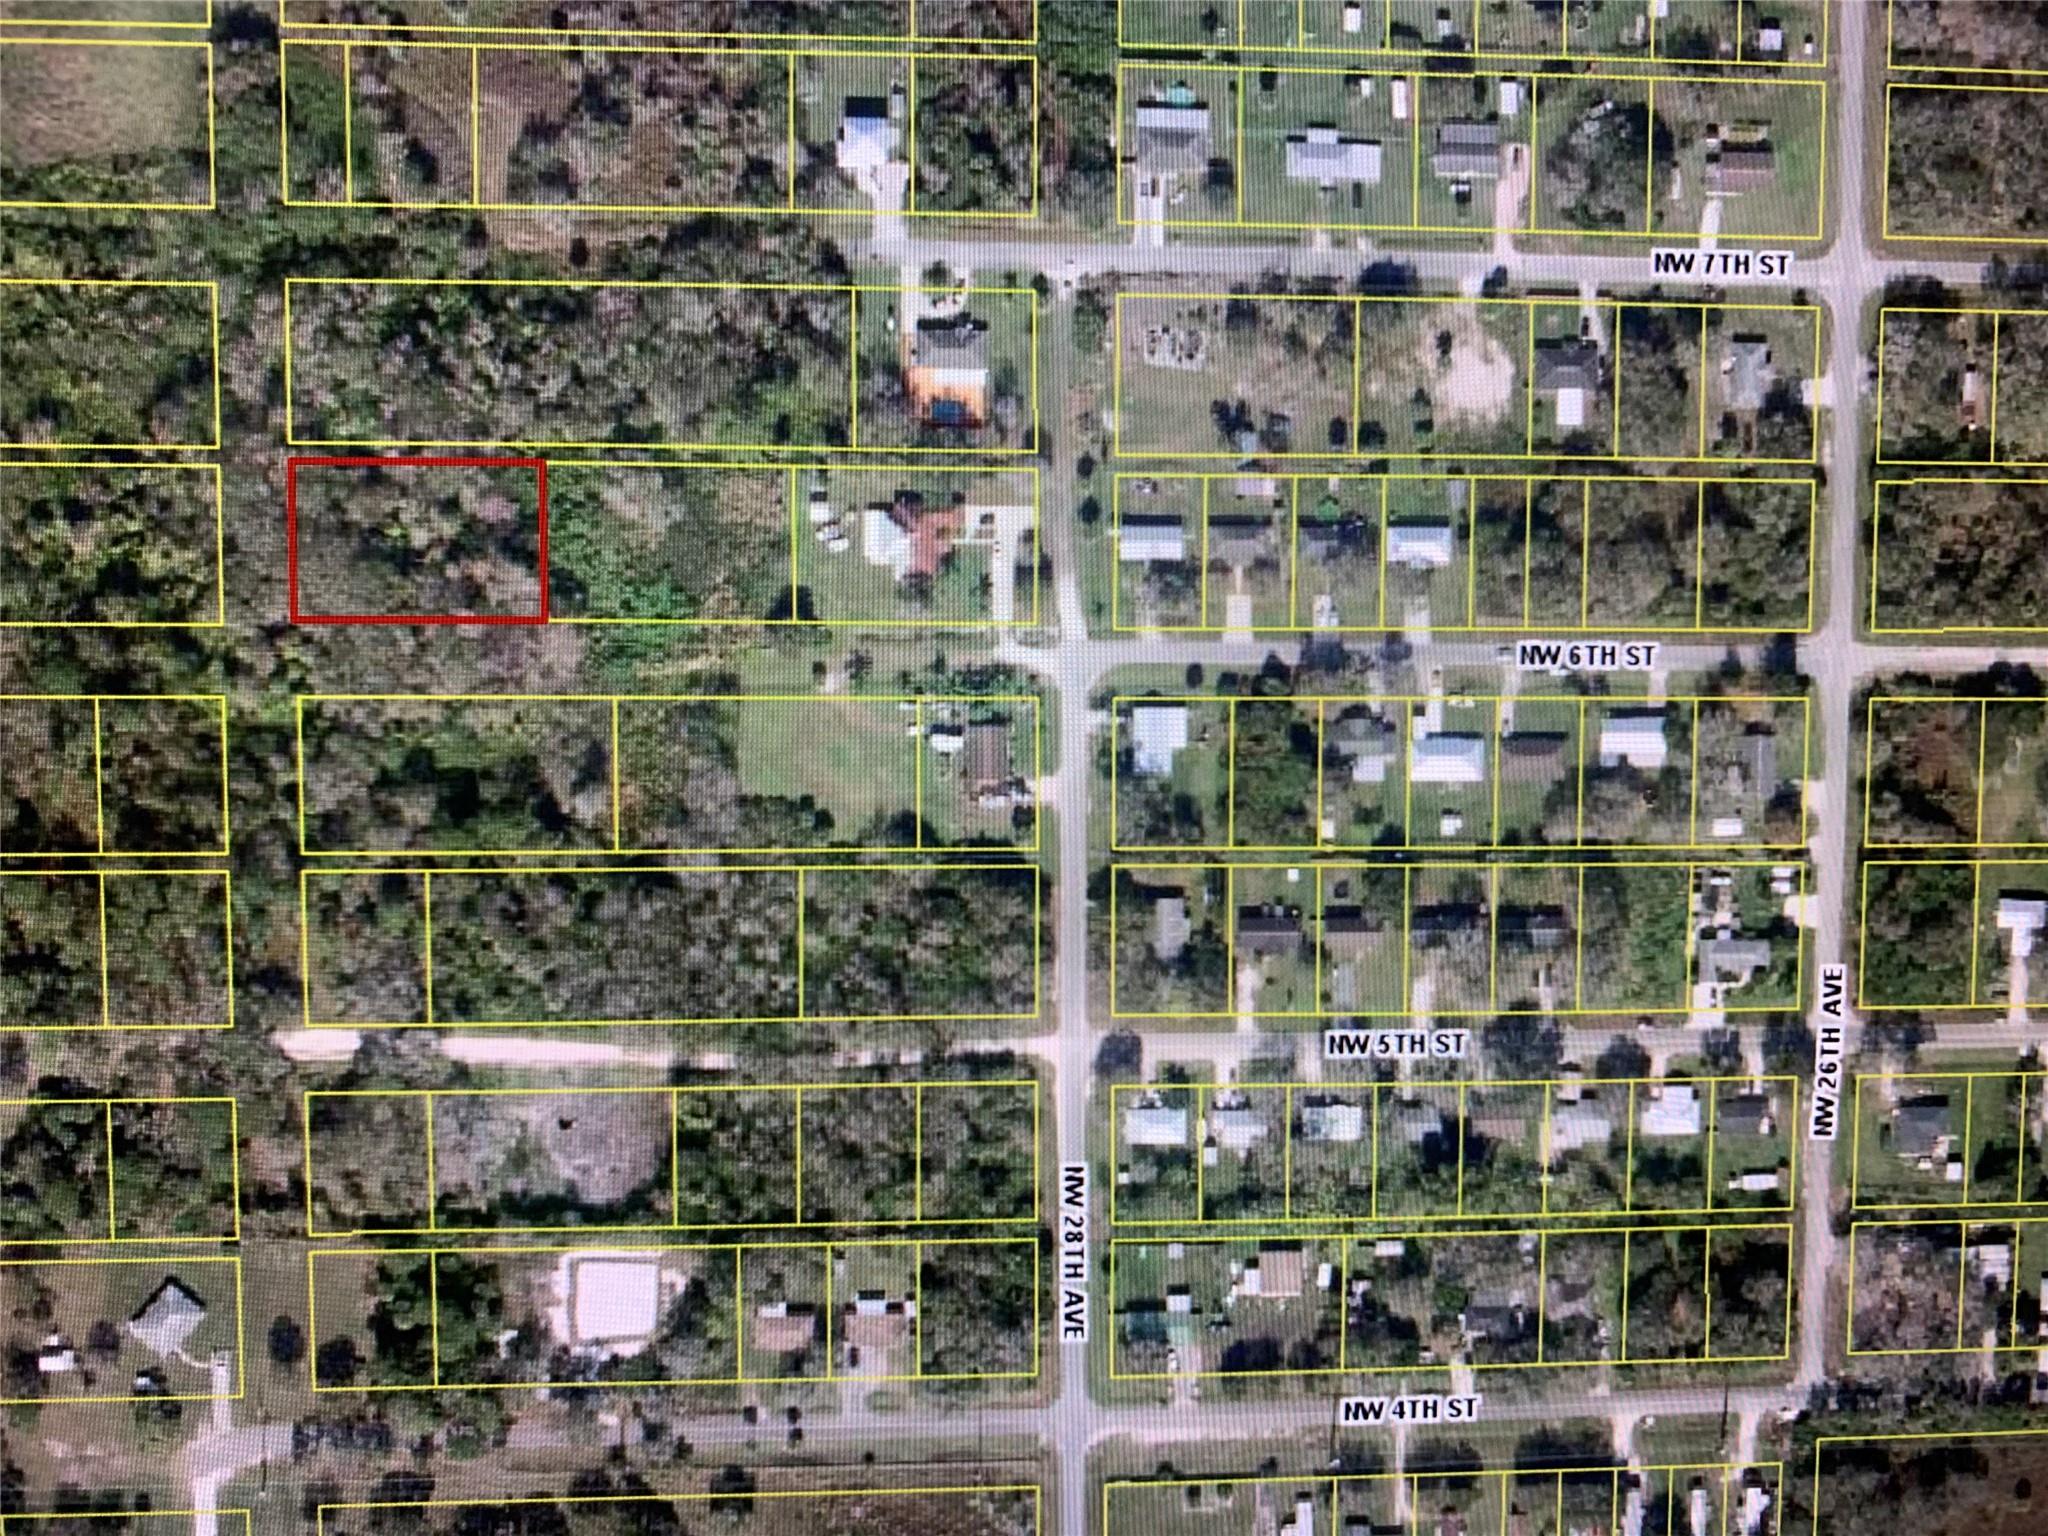 Unimproved land close to Okeechobee. This property is located in Okeechobee Park and is 0.58+/- acres. This land could be split into 2 residential homesites. There is no county road access to this property currently, but it could be built so that you can build homes.